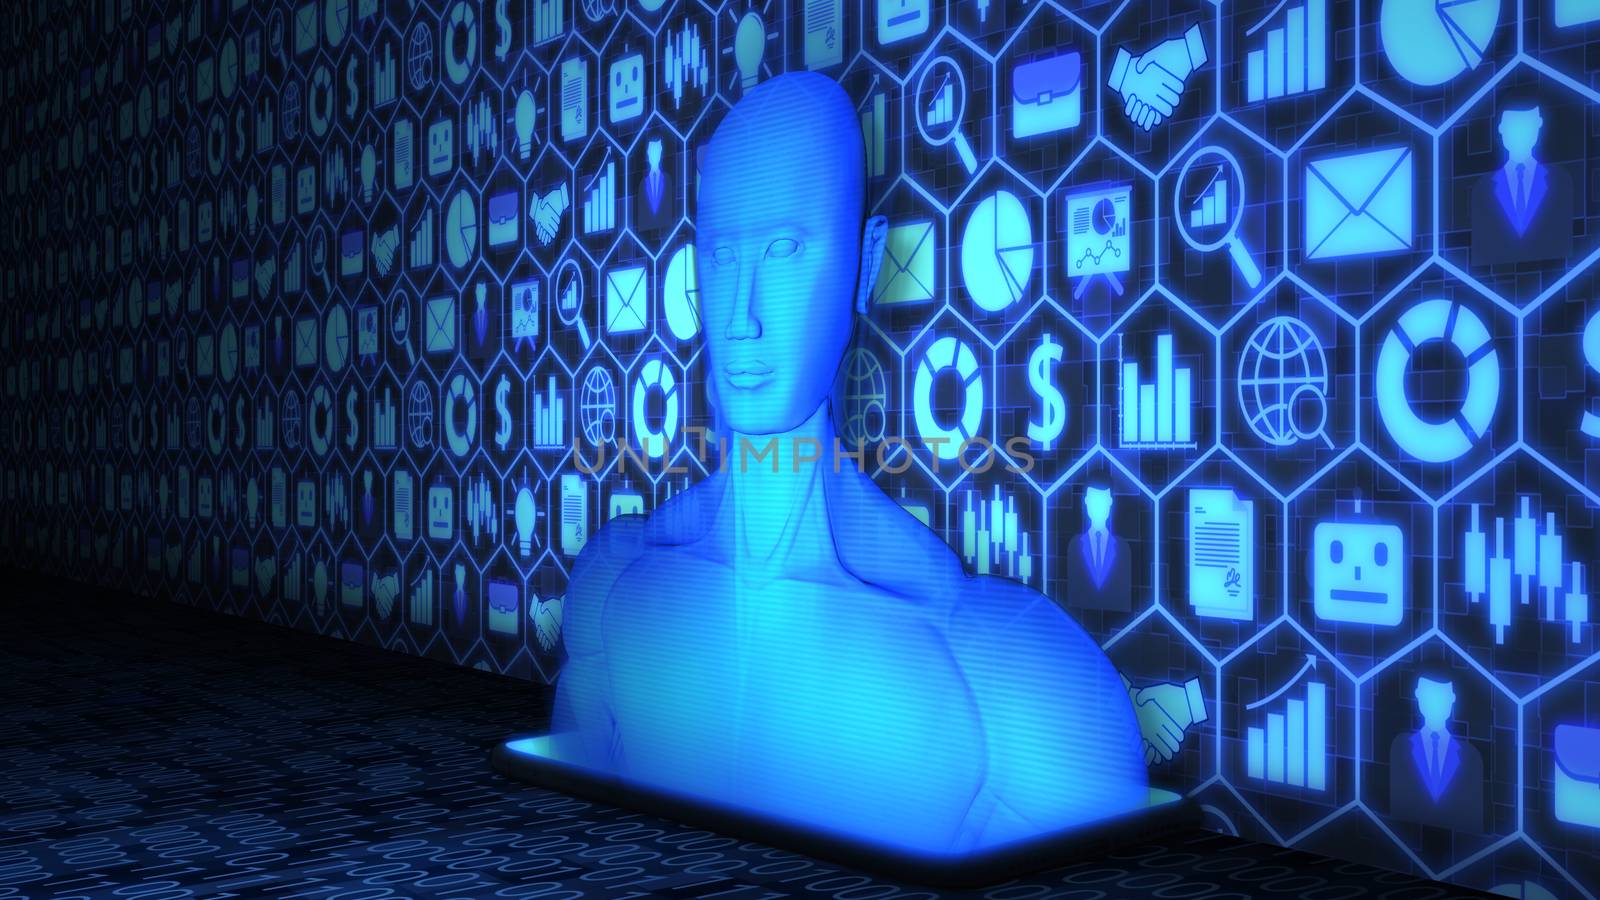 8K 3D Rendered AI/Human Hologram projected from Smartphone on the floor with Business and Technology icon set Background and Random Binary Code on the floor in blue color